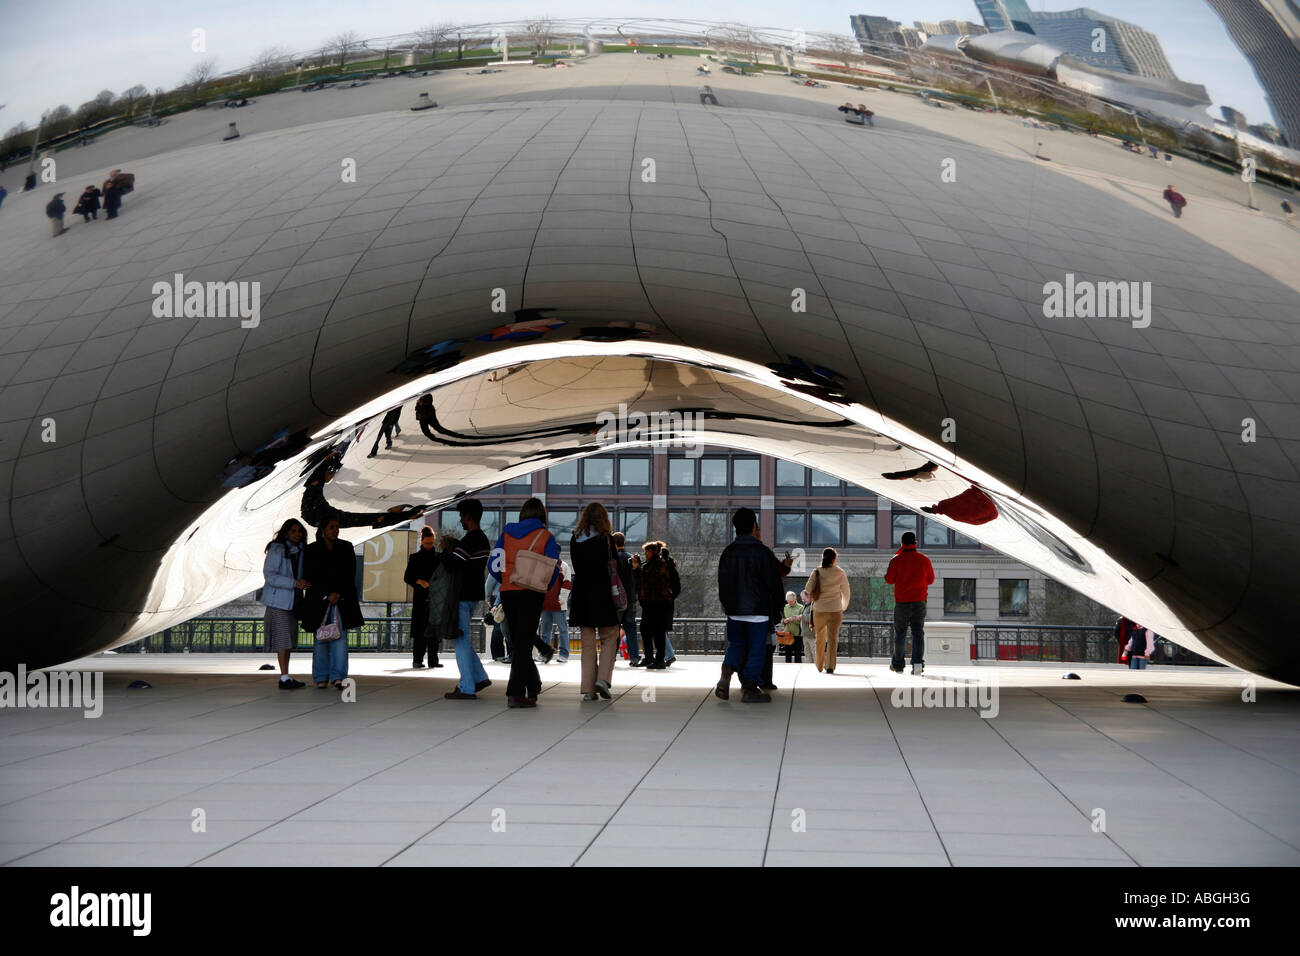 People standing underneath the Cloud Gate Sculpture in Chicago Illinois USA Stock Photo